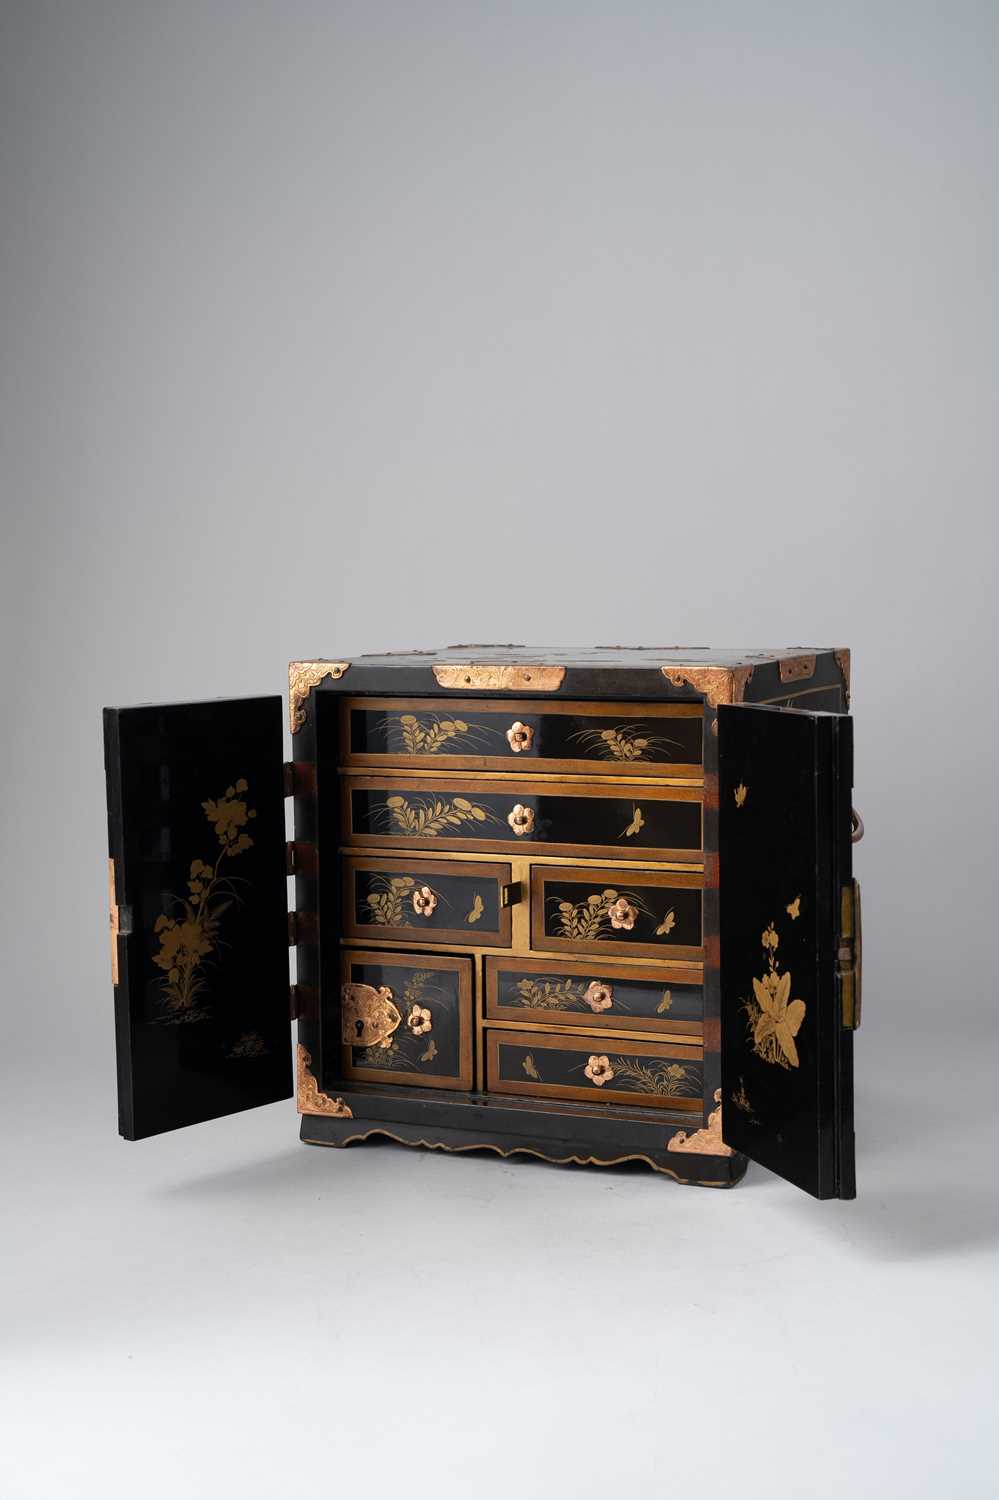 NO RESERVE A JAPANESE GOLD AND BLACK LACQUER CABINET EDO PERIOD, 17TH CENTURY For the European - Image 2 of 2